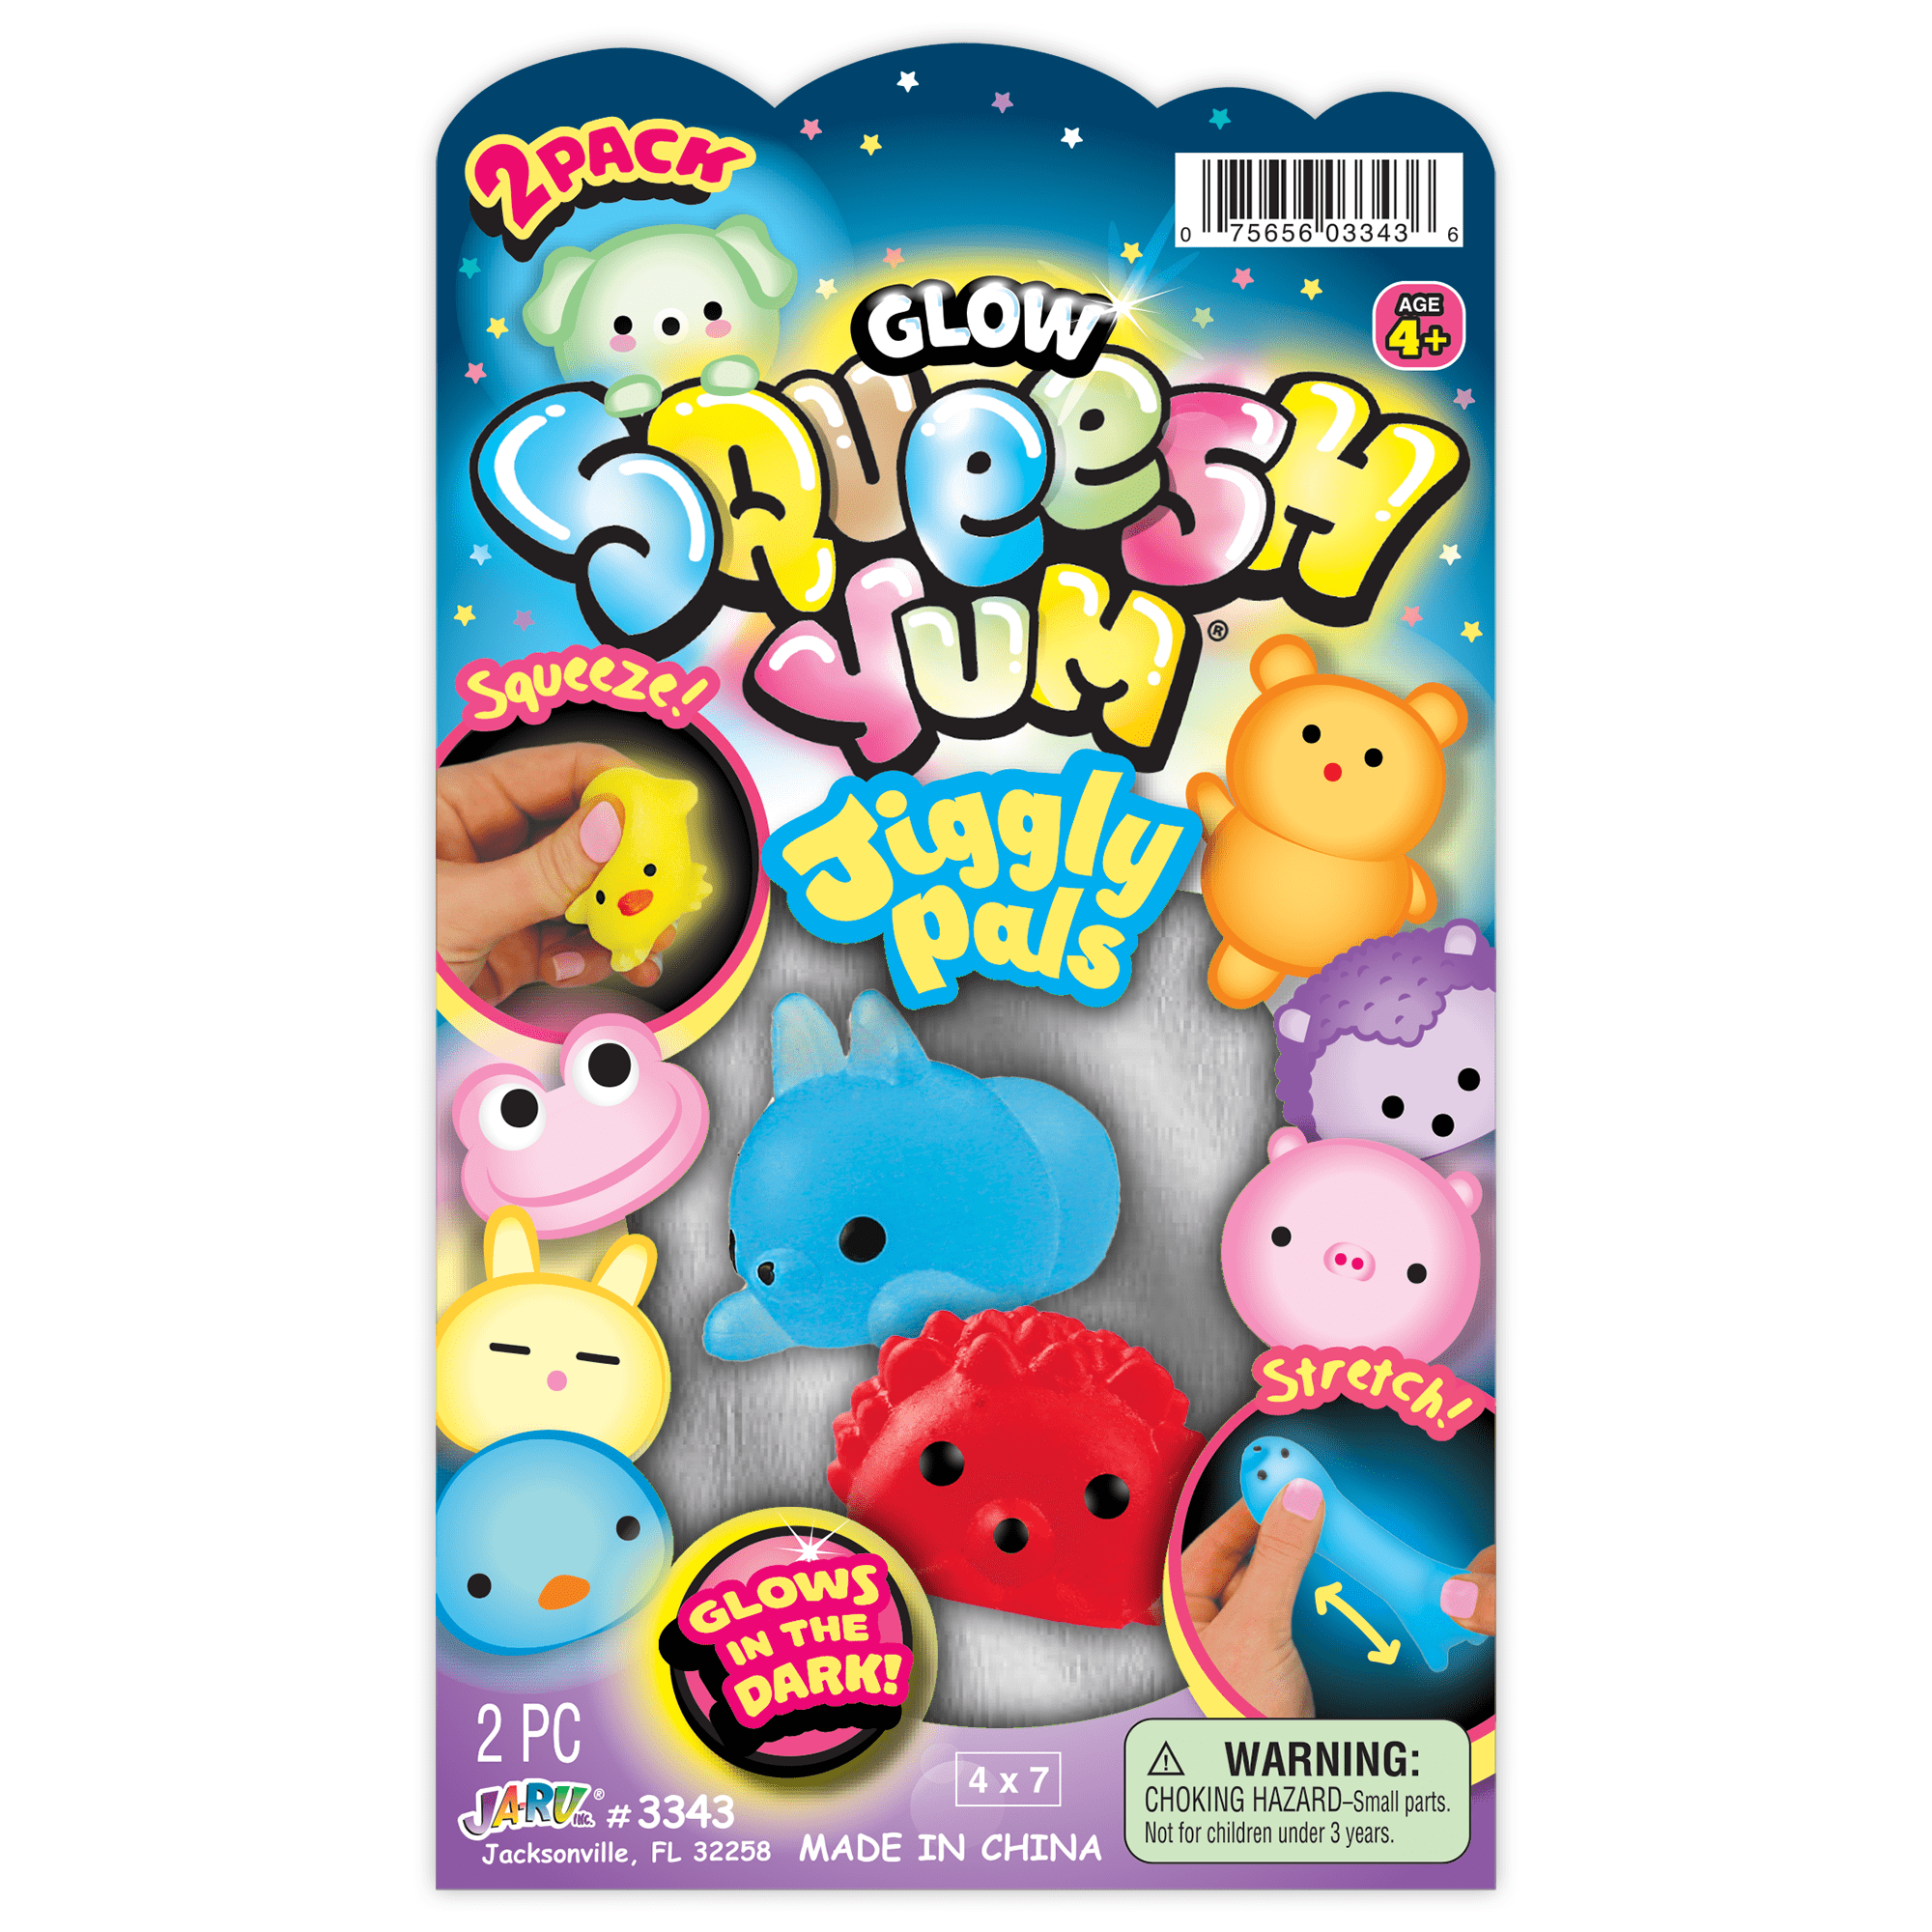 Squeesh yum Juggly Pals 2 Pack Mini Squishy Squeeze Toys 